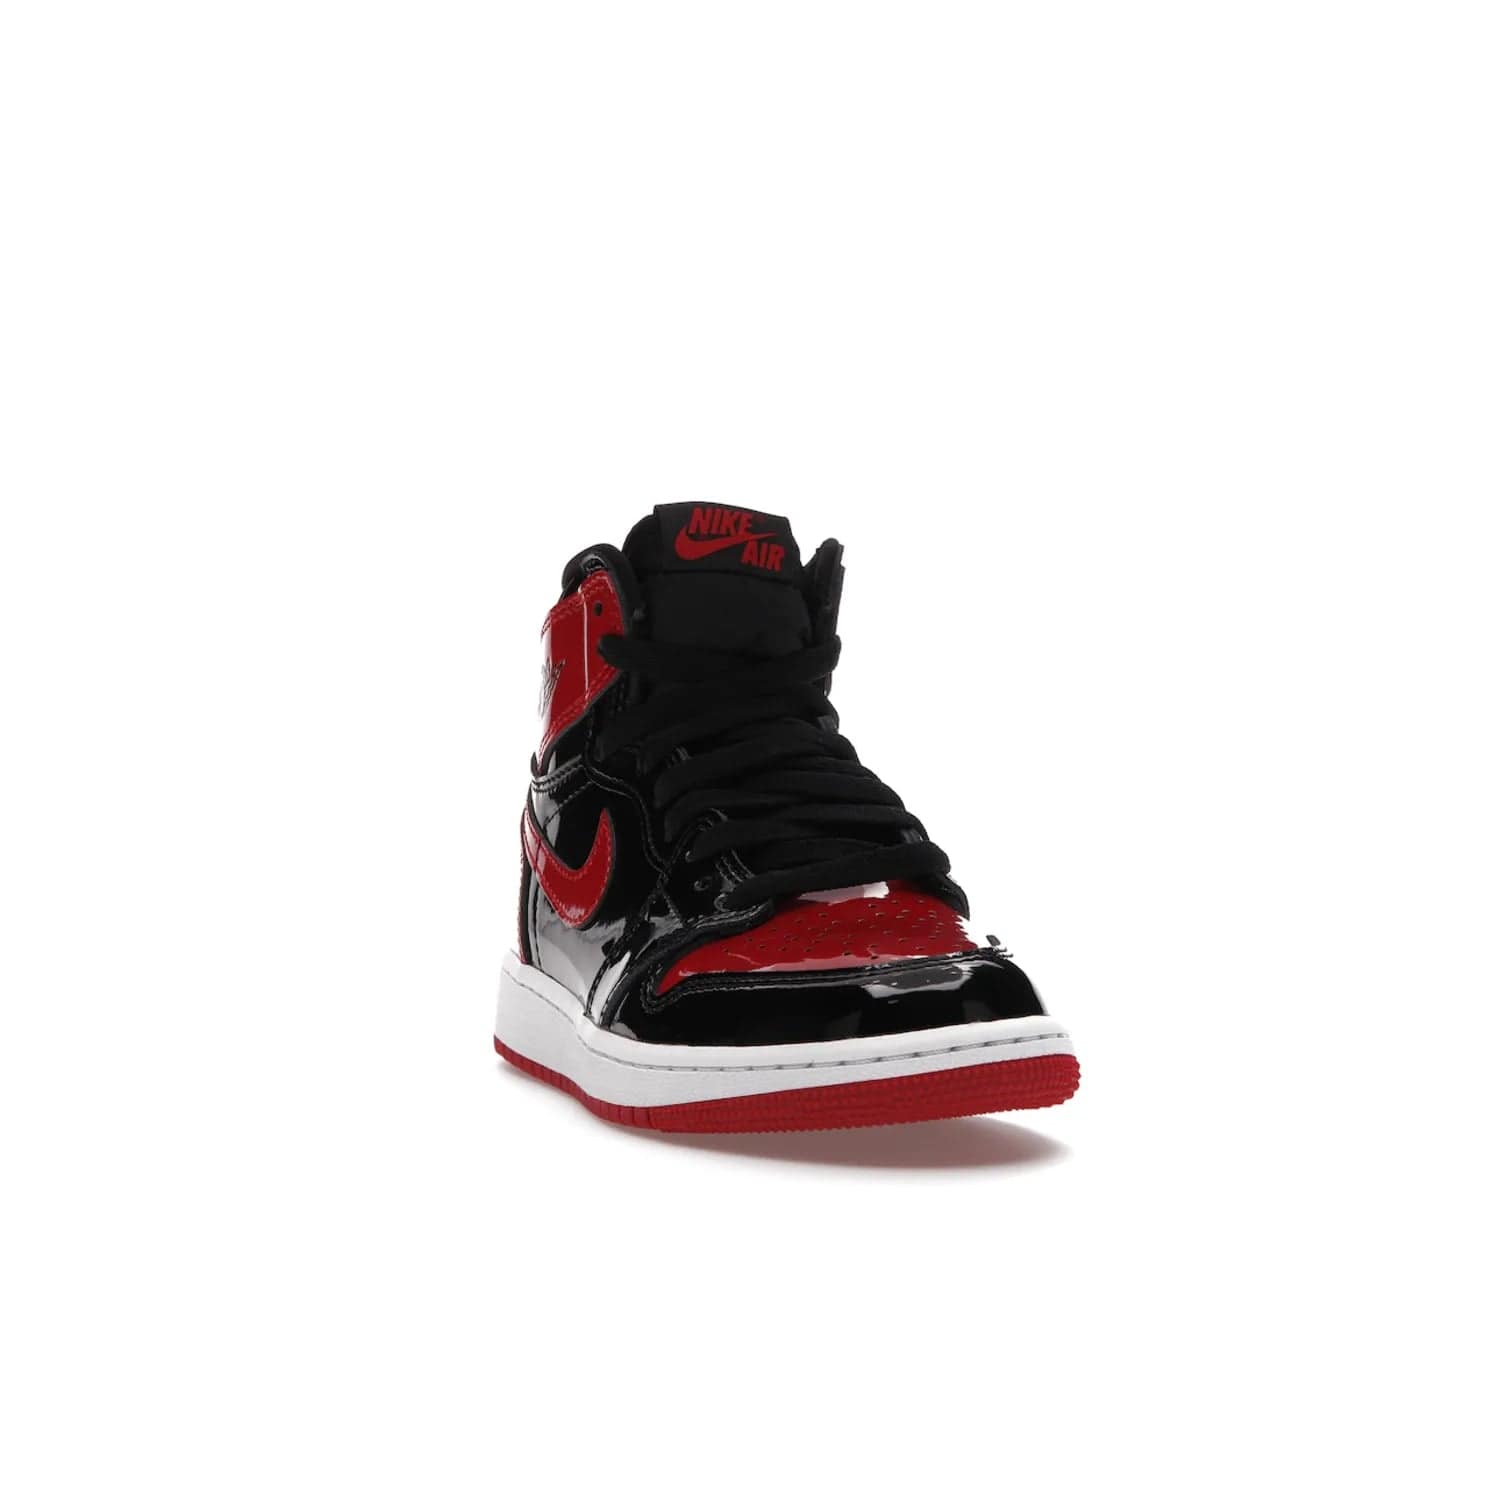 Jordan 1 Retro High OG Patent Bred (GS) - Image 8 - Only at www.BallersClubKickz.com - Upgrade your sneaker game with the iconic Air Jordan 1 Retro High OG Bred Patent GS. Crafted with premium patent leather and basketball-inspired details for a classic look, they also feature an encapsulated Air-sole cushioning and enhanced red rubber outsole. Don't miss this timeless sneaker with a striking black, white, and varsity red colorway, dropping December 2021.